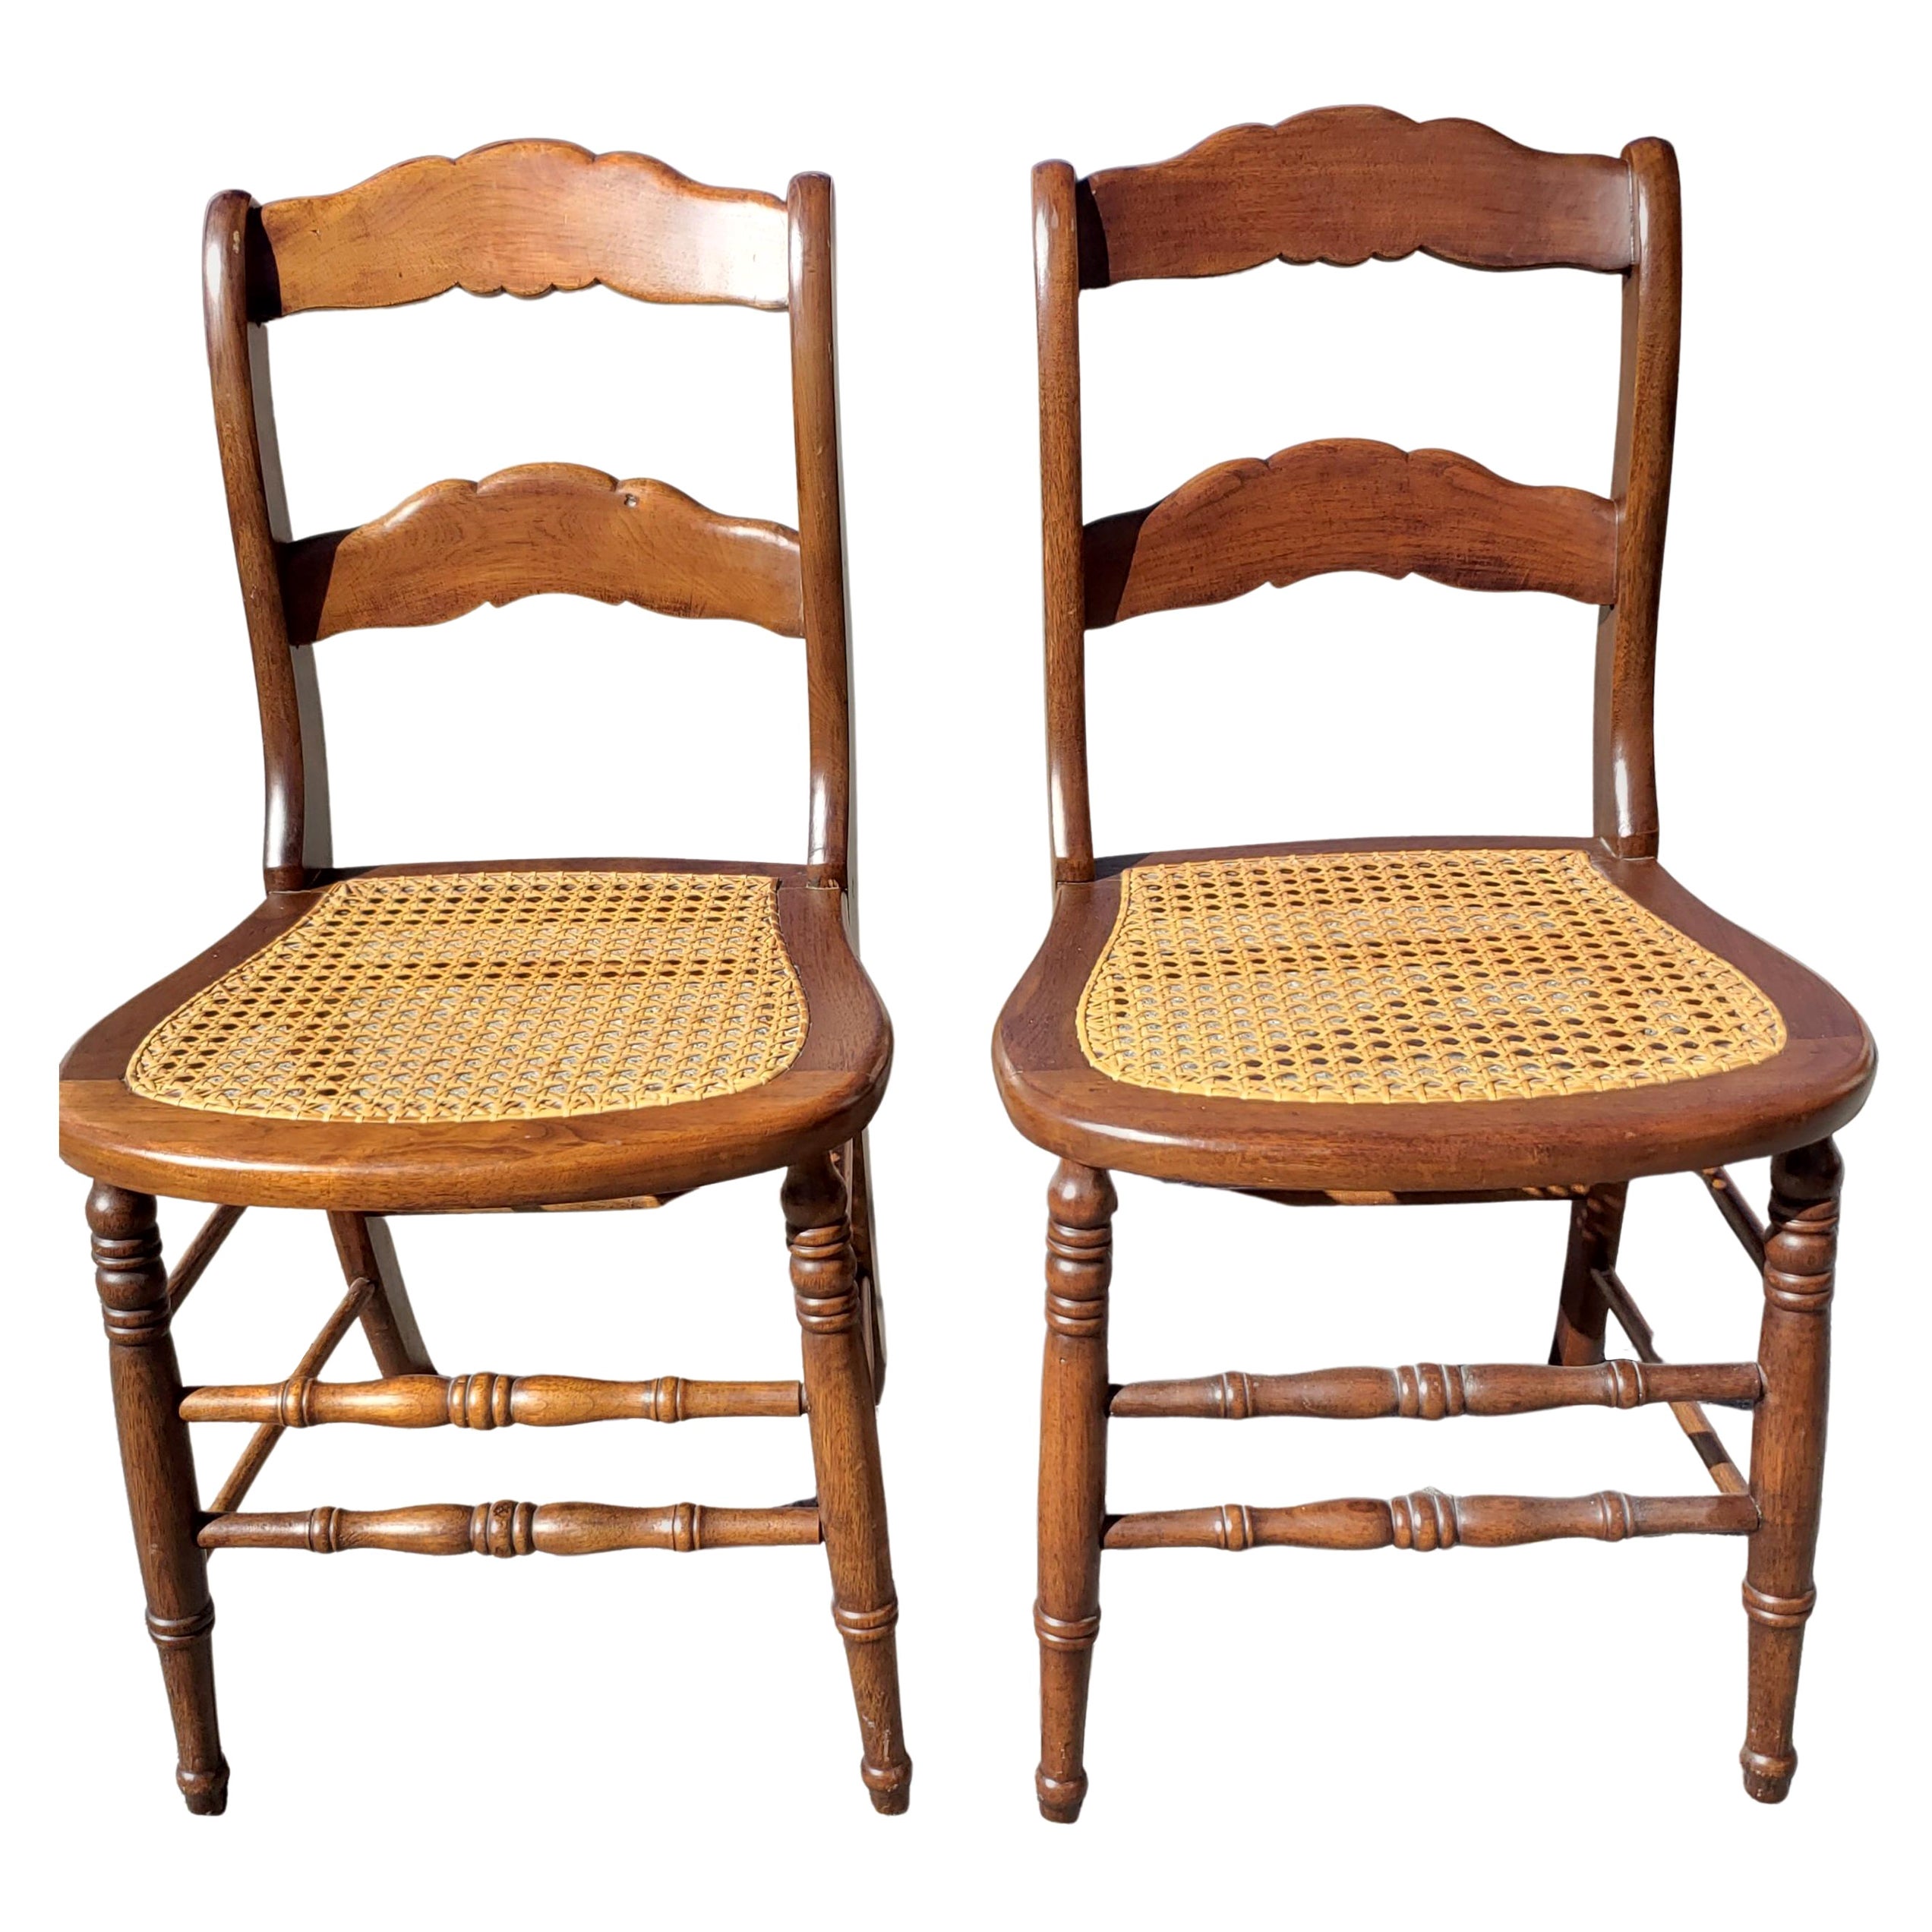 Late 19th Century Americana Cane Seat and Ladder Back Chairs, a Pair